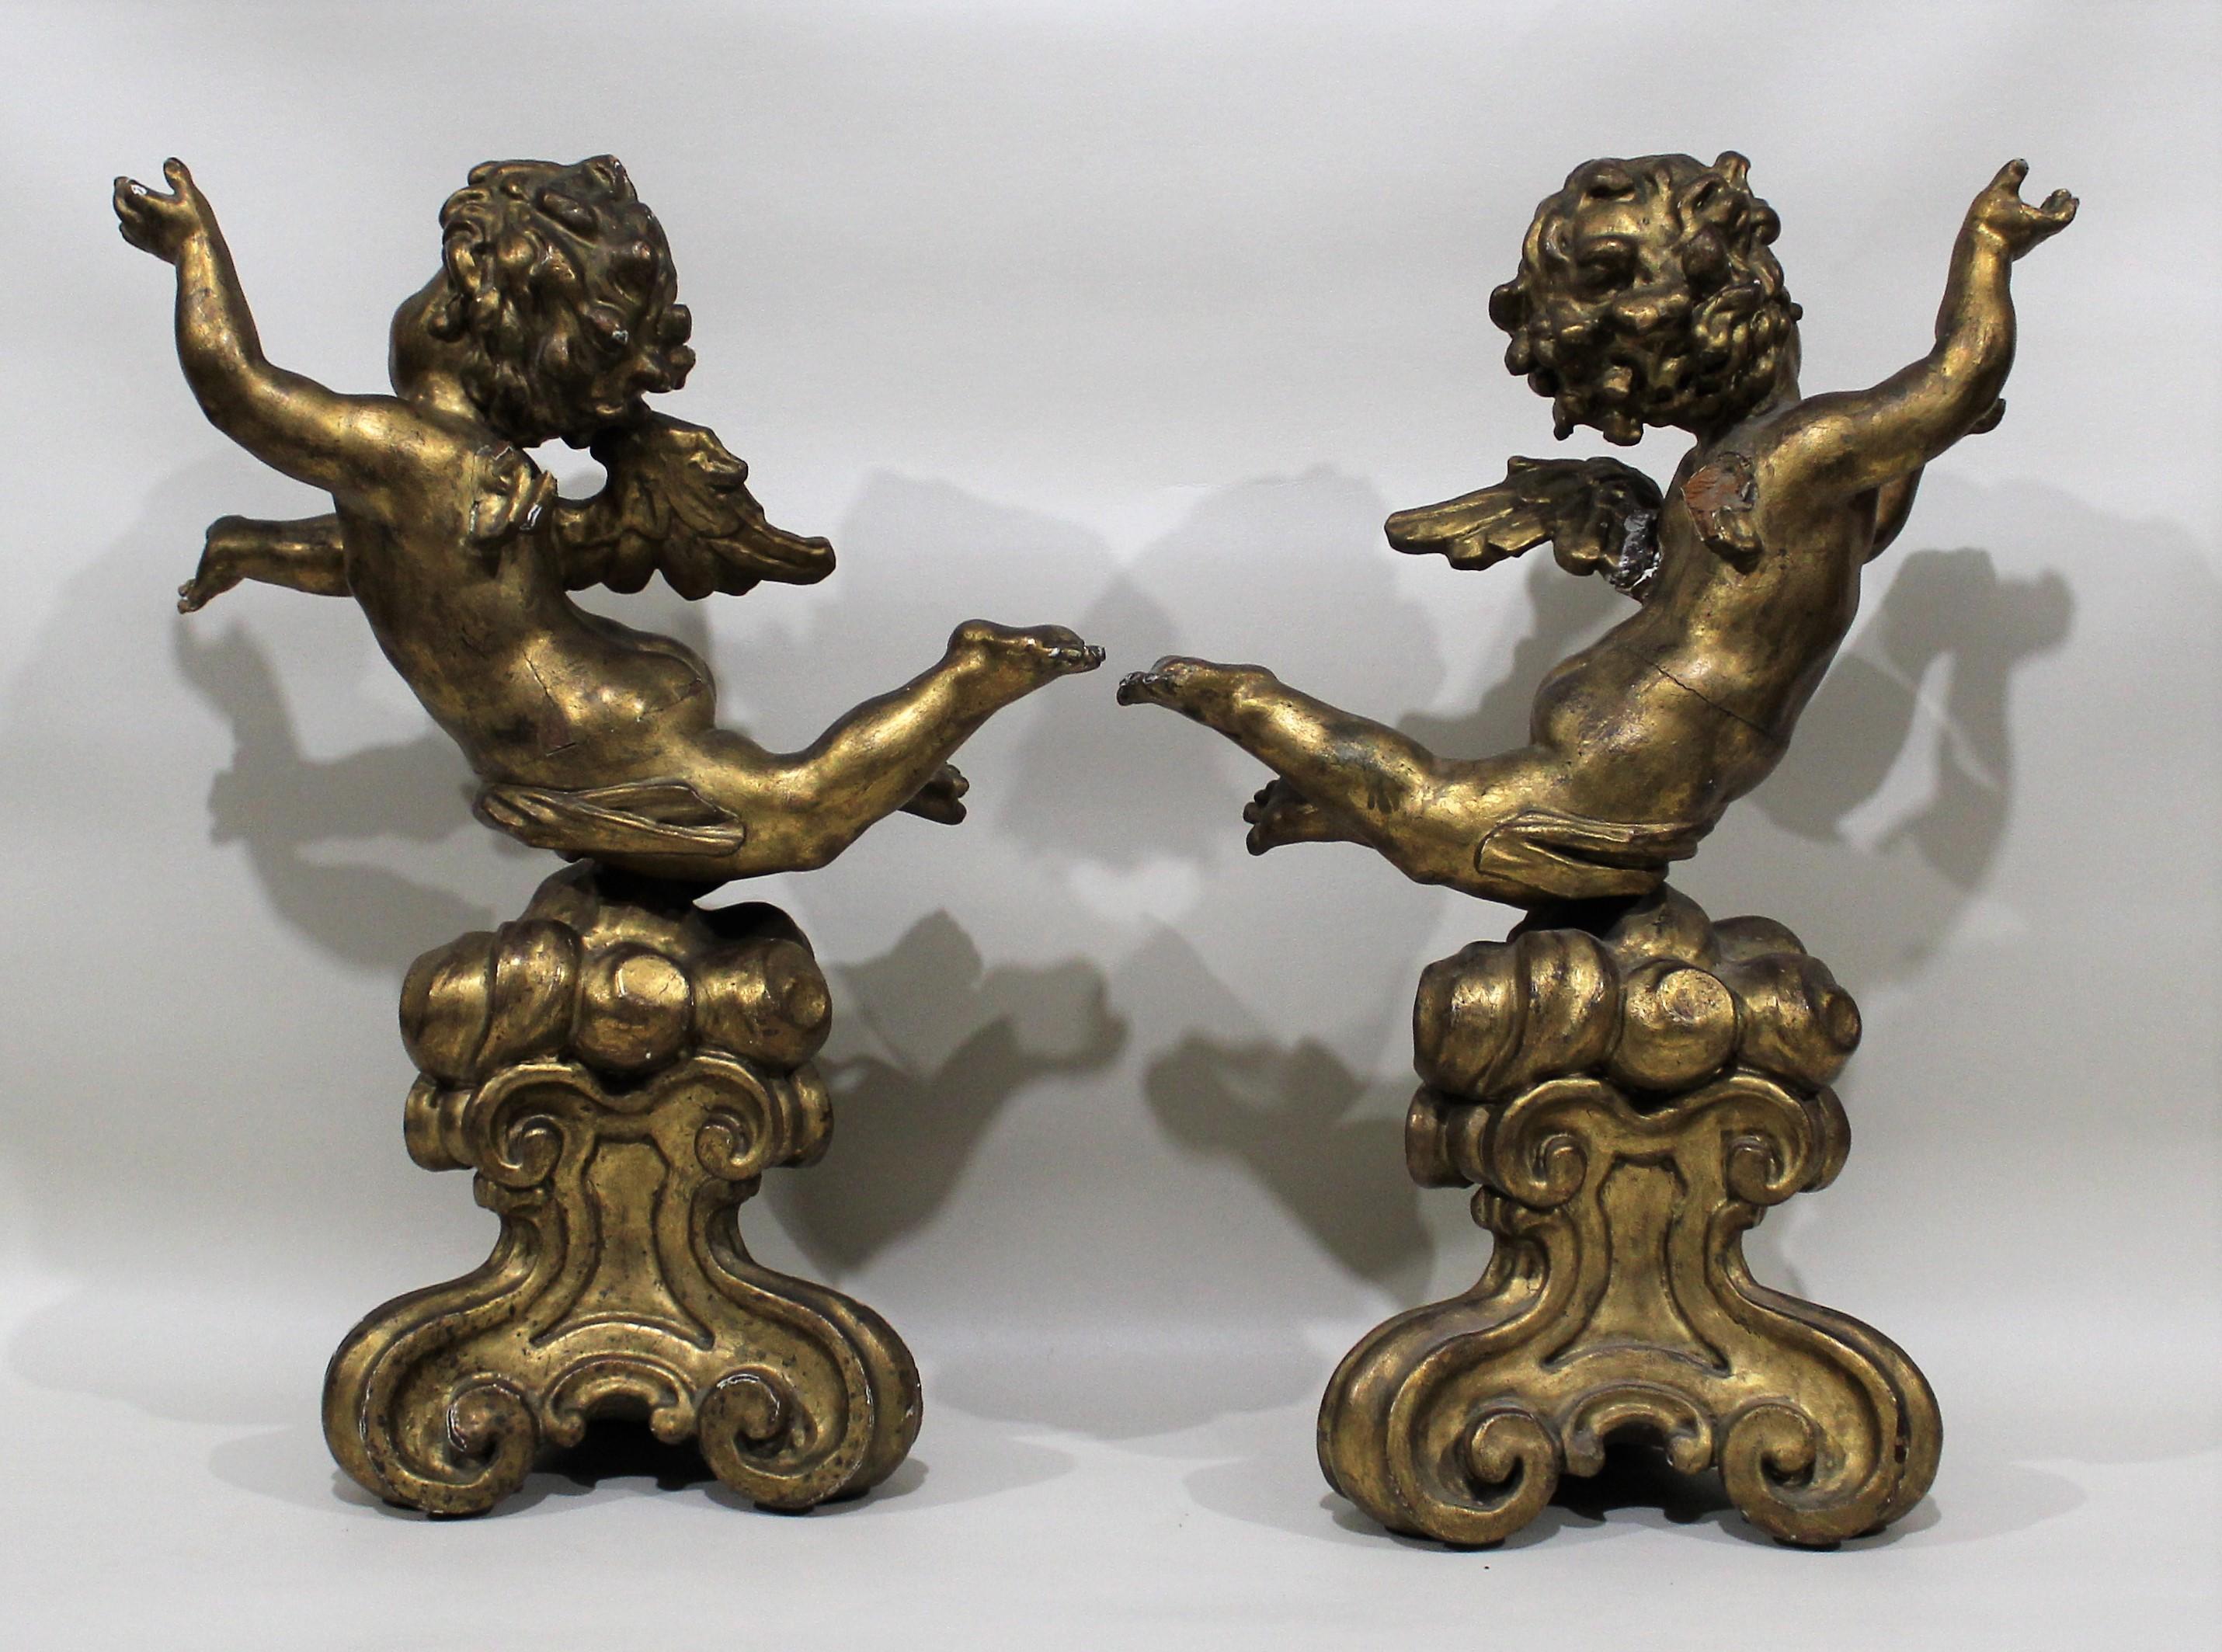 19th Century Antique Pair of Gilt Carved Wood Putti Figures